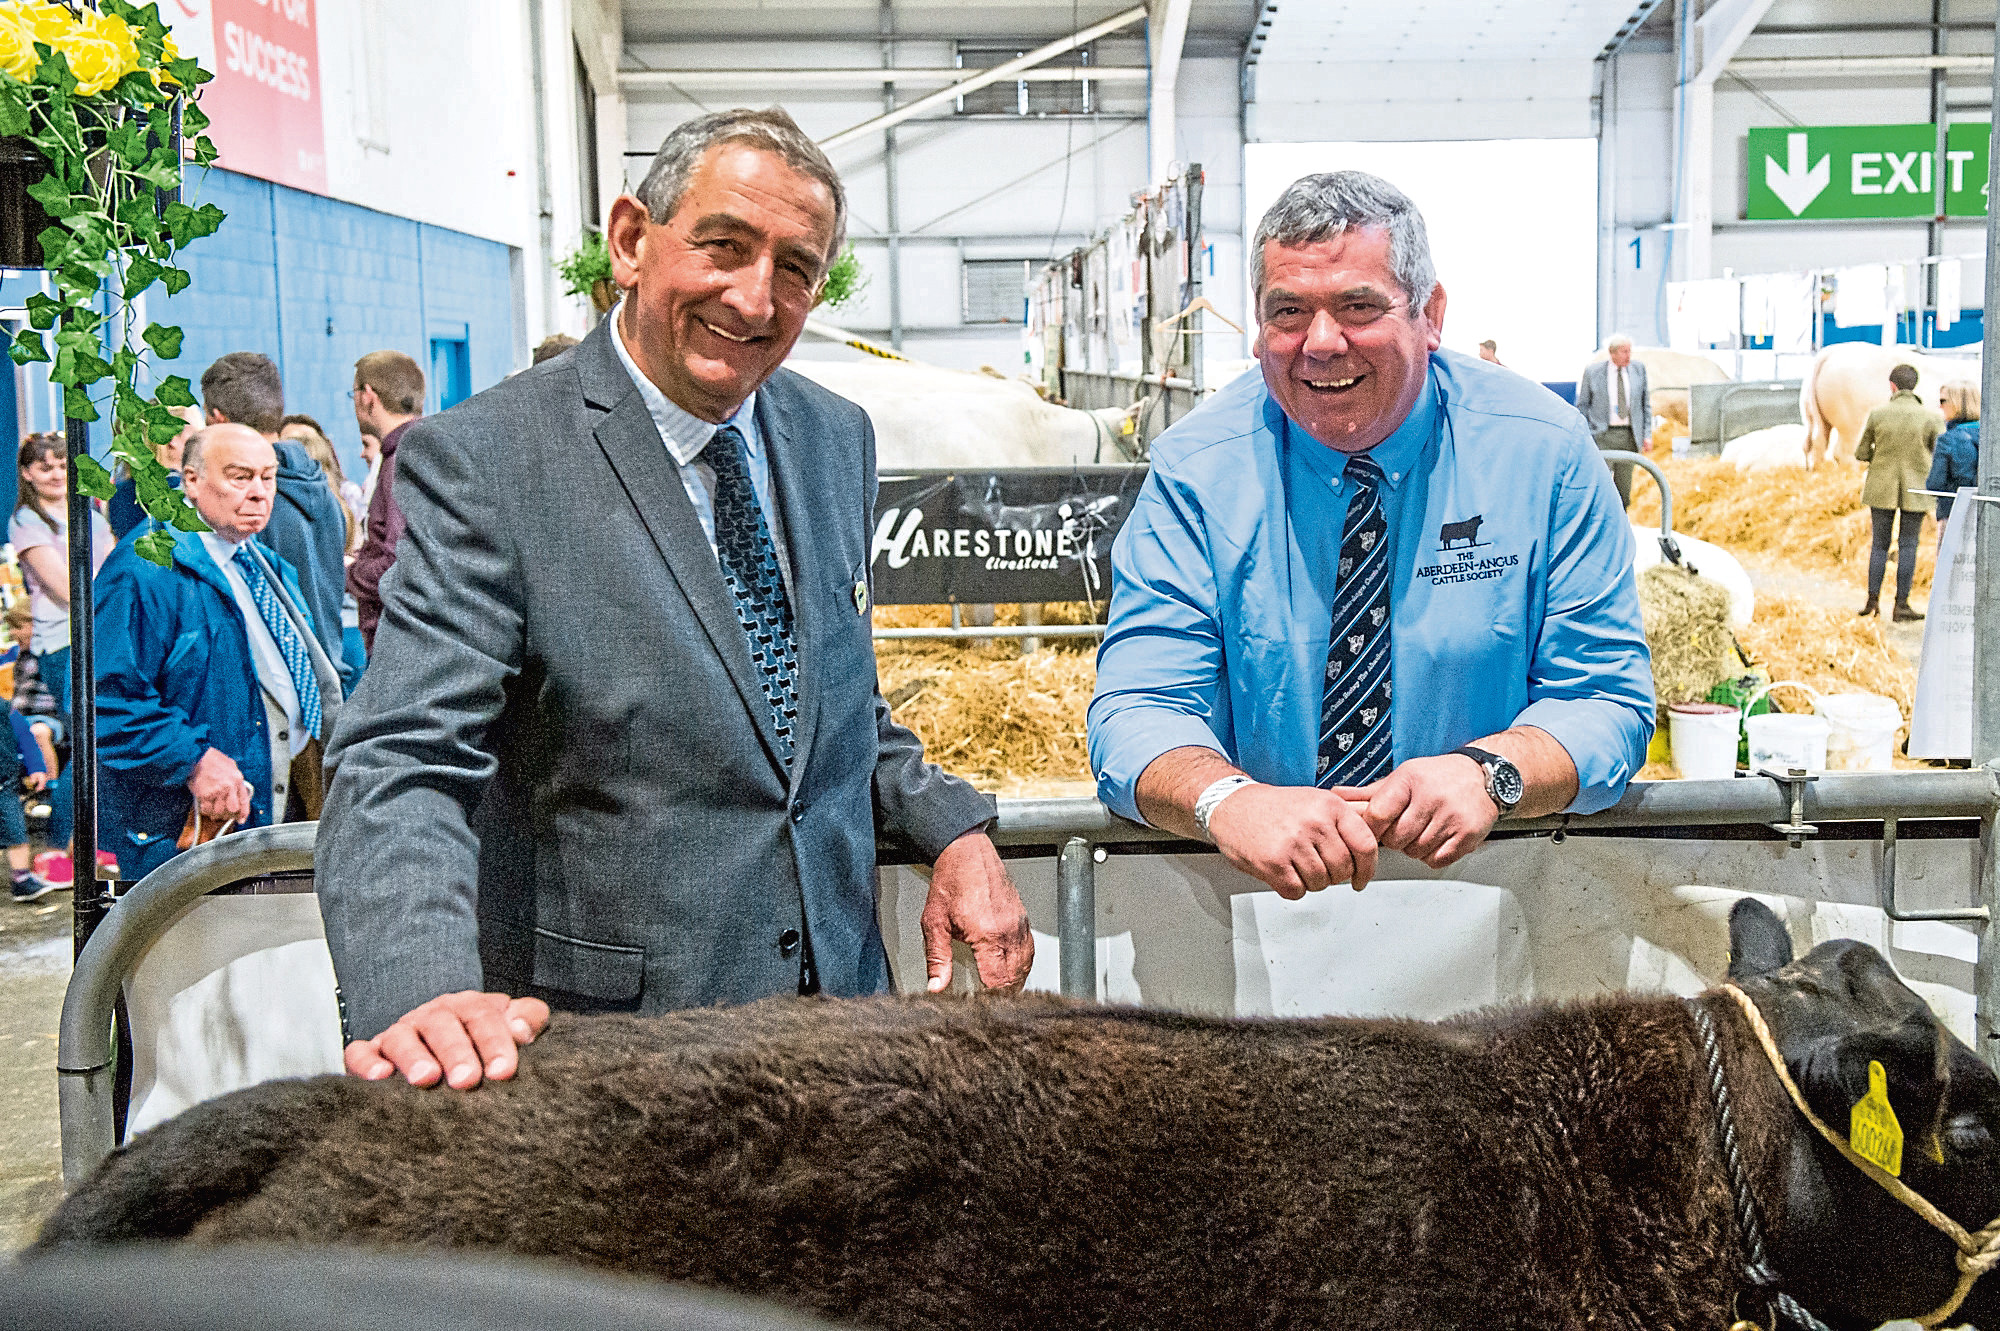 Aberdeen-Angus Cattle Society president Paul Jeenes and chief executive Barrie Turner.